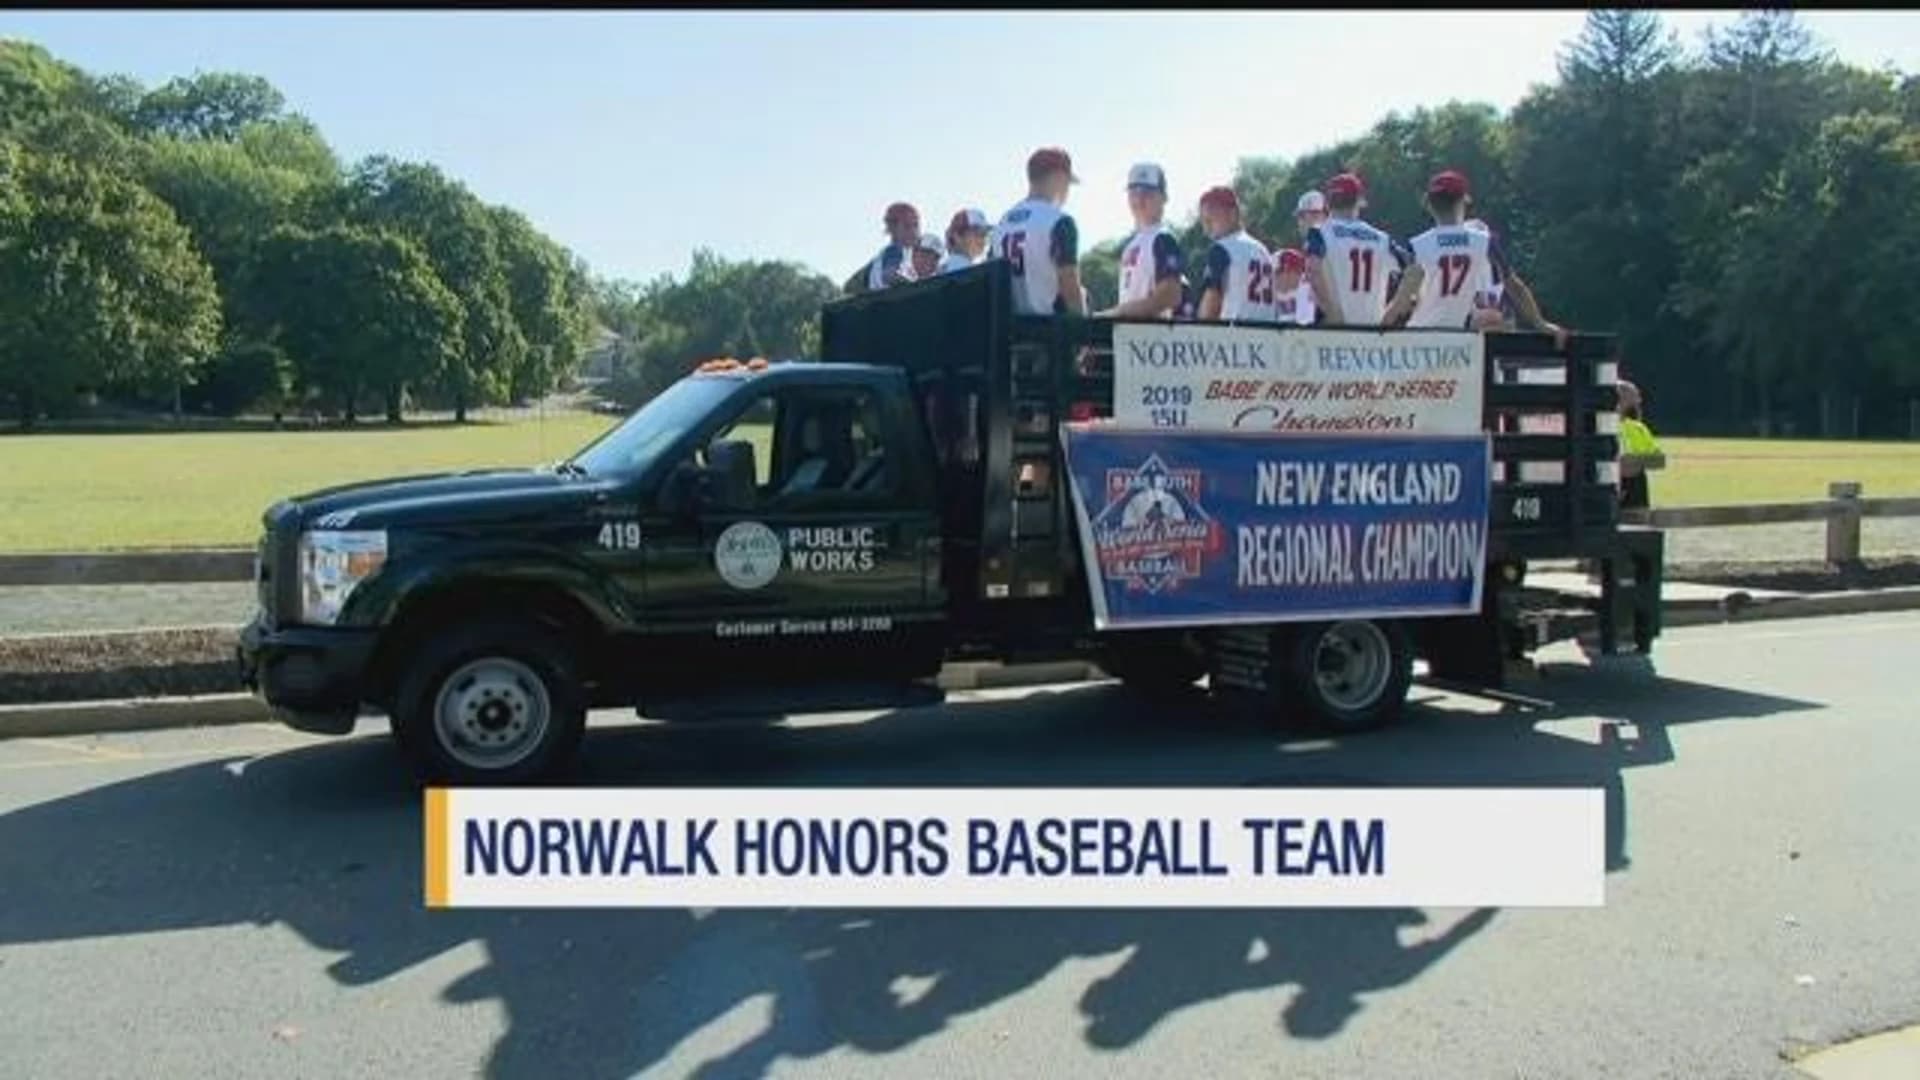 Kings of the City: Norwalk Revolution champs honored with parade